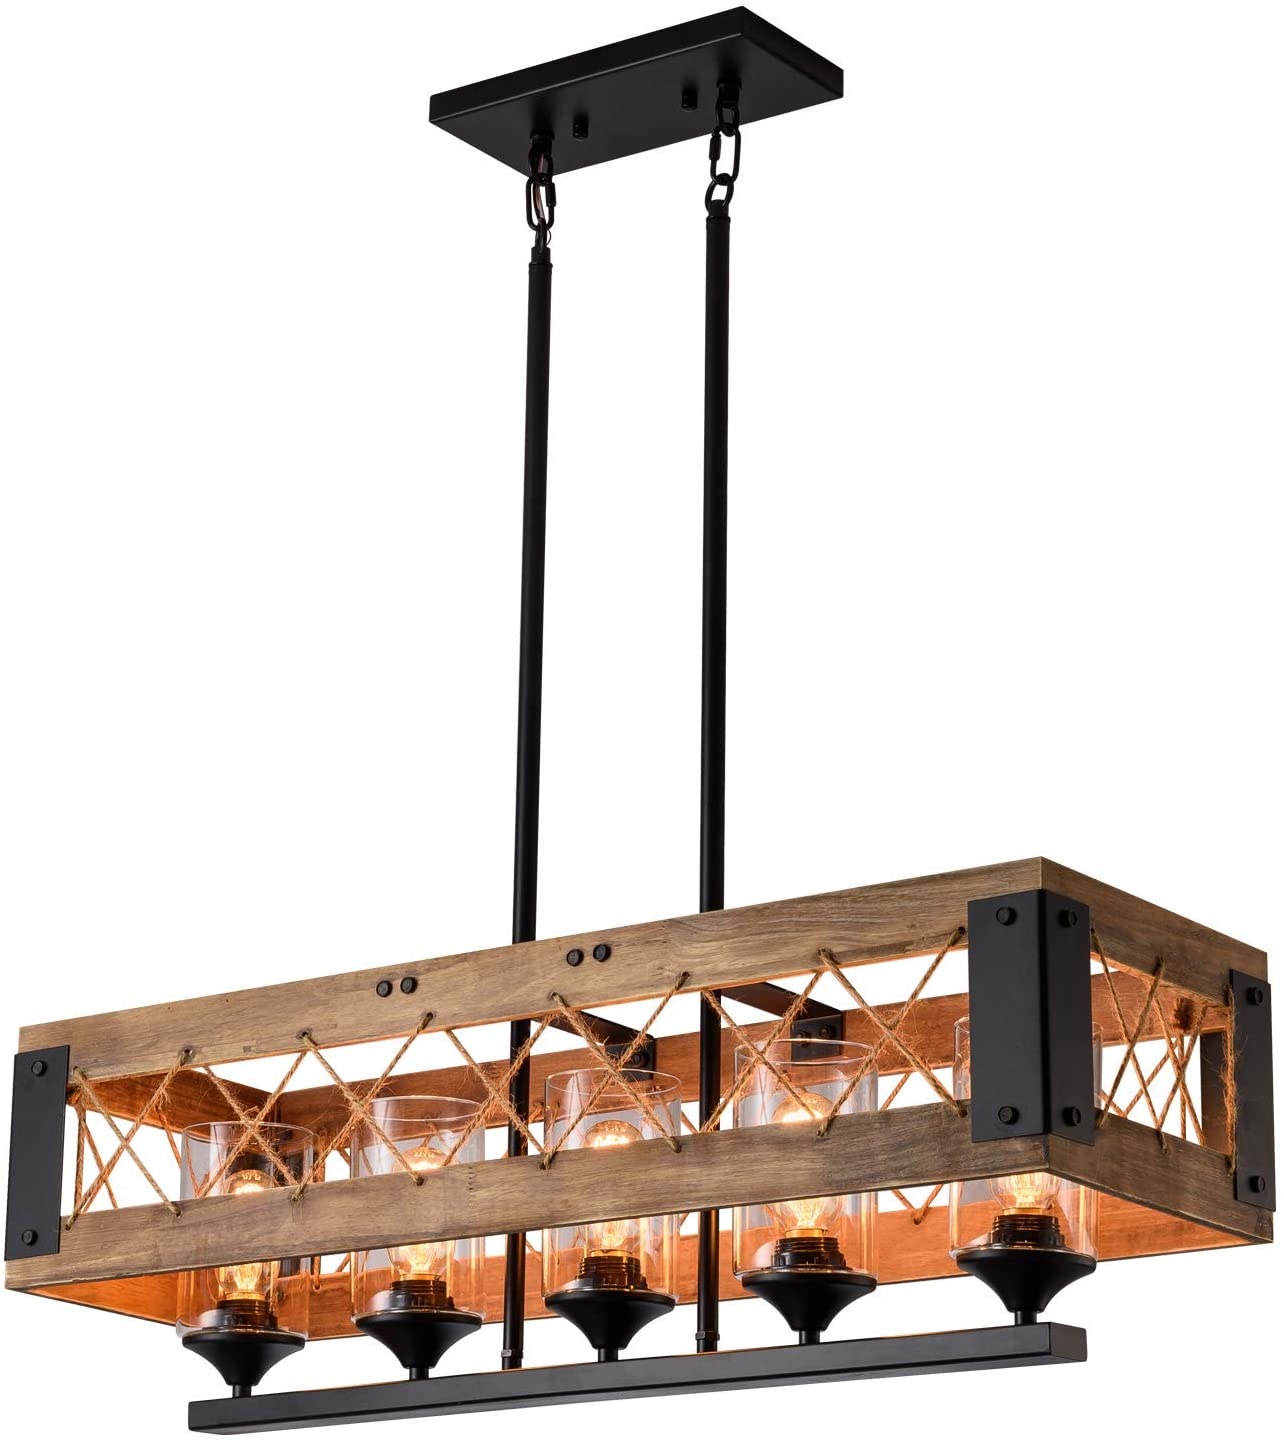 XIPUDA 5-Light Kitchen Island Lighting, Industrial Pendant Light Fixture, Farmhouse Chandeliers, Pool Table Linear Ceiling Lights, Wood Metal Frame Hanging Light for Dinning Room